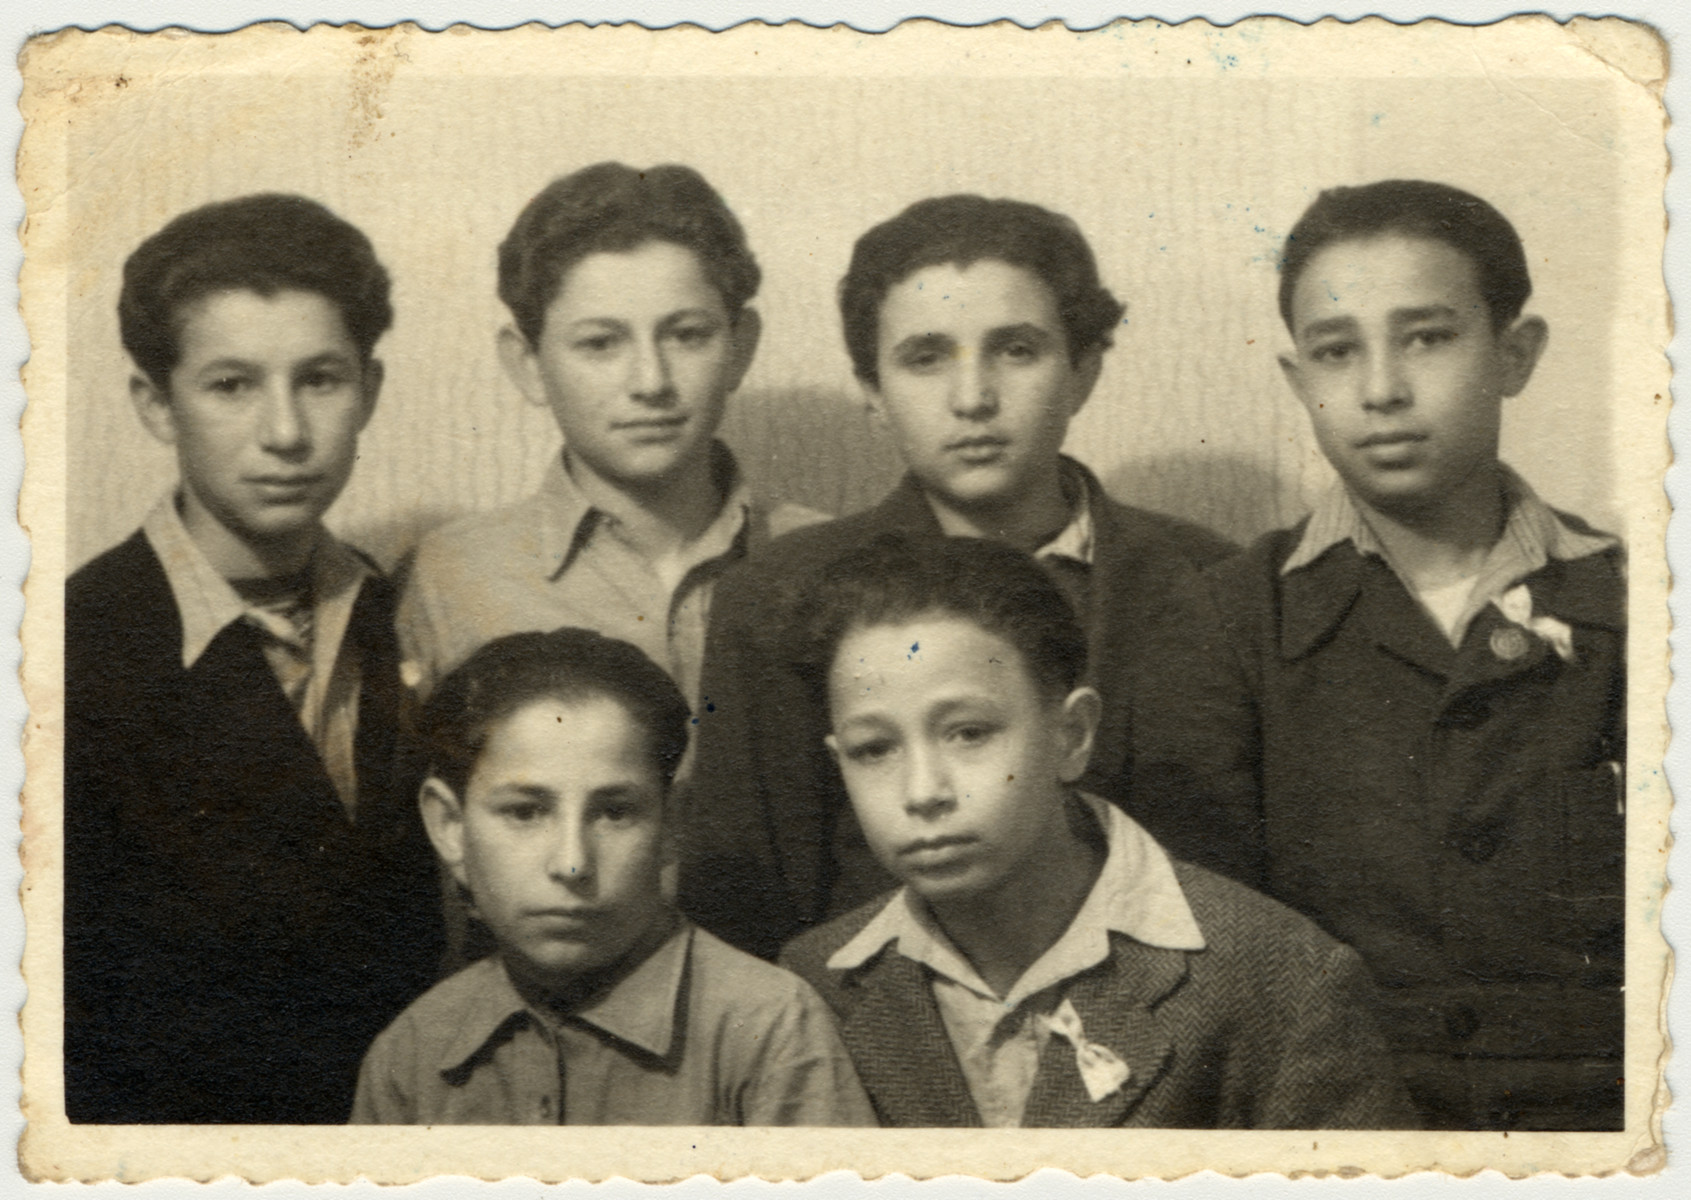 Studio portrait of a group of teenagers in the Rosenheim displaced persons' camp.

Pictured in the back row from left to right are Motle Goldfinger, Tzvi Brill, unknown, Aaron Miller.  Seated in front of Aaron Miller is his brother.